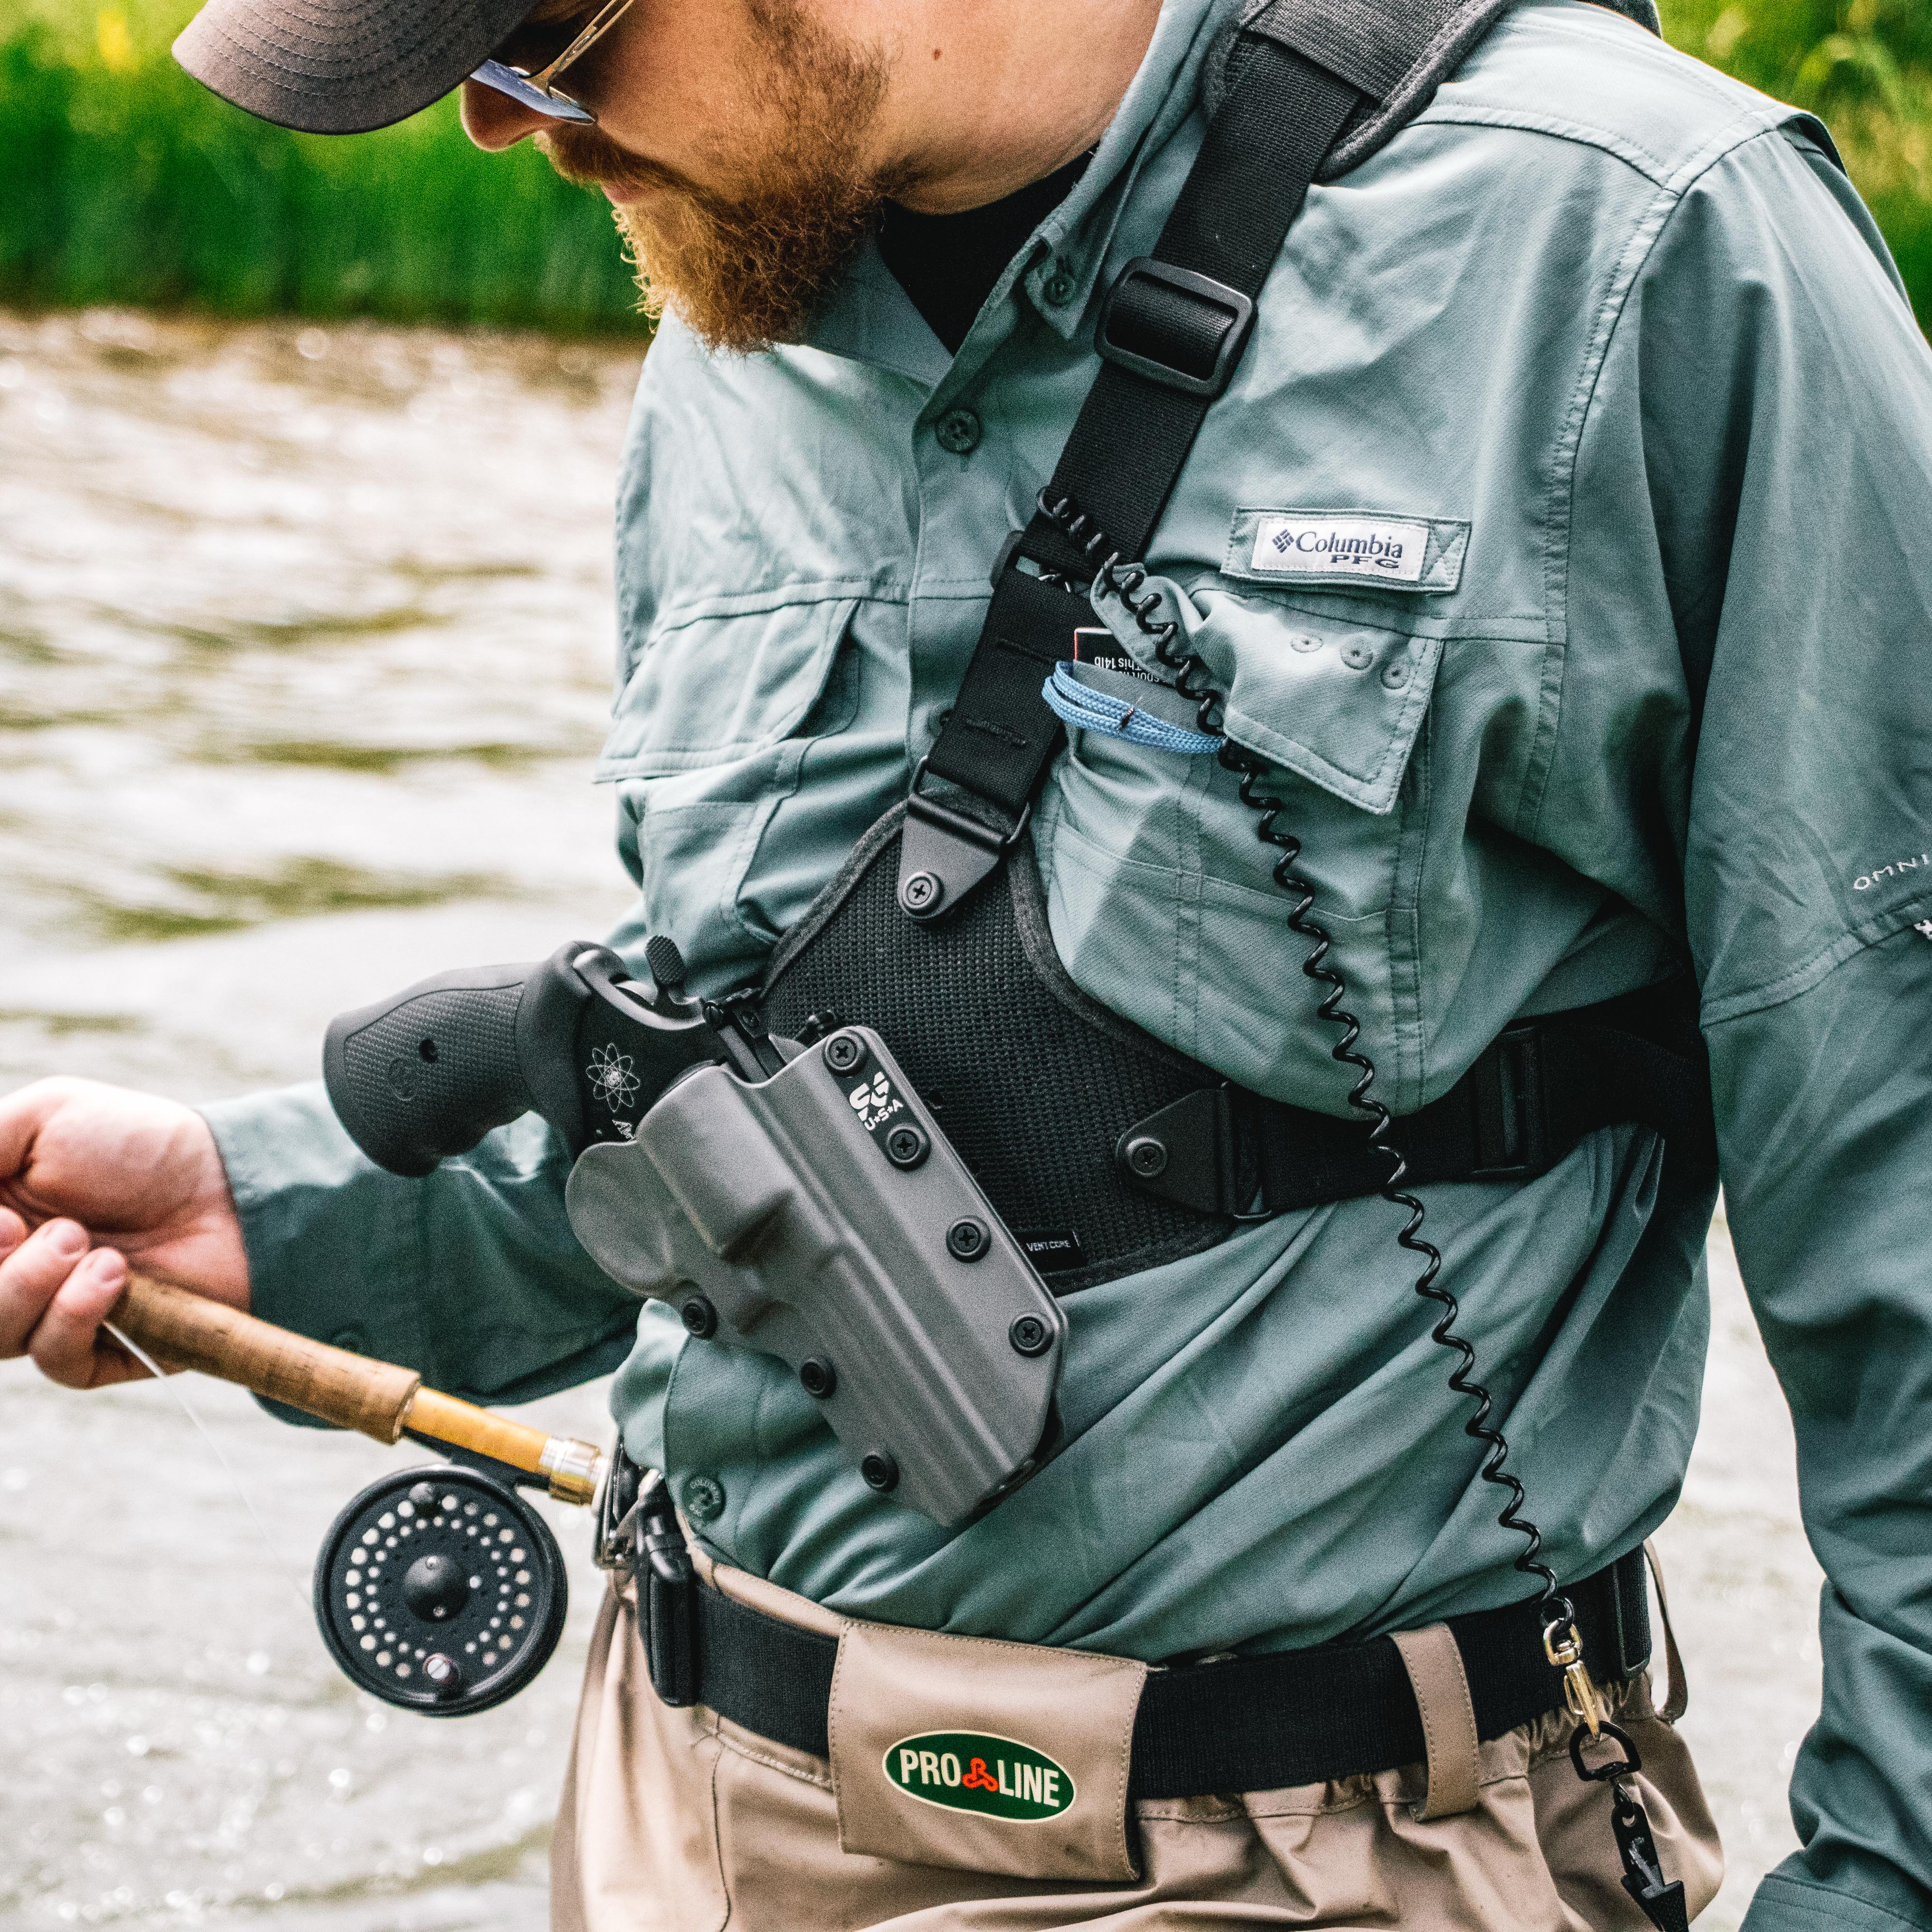 Chest Rig Setup for Fly Fishing - Norden Outdoors